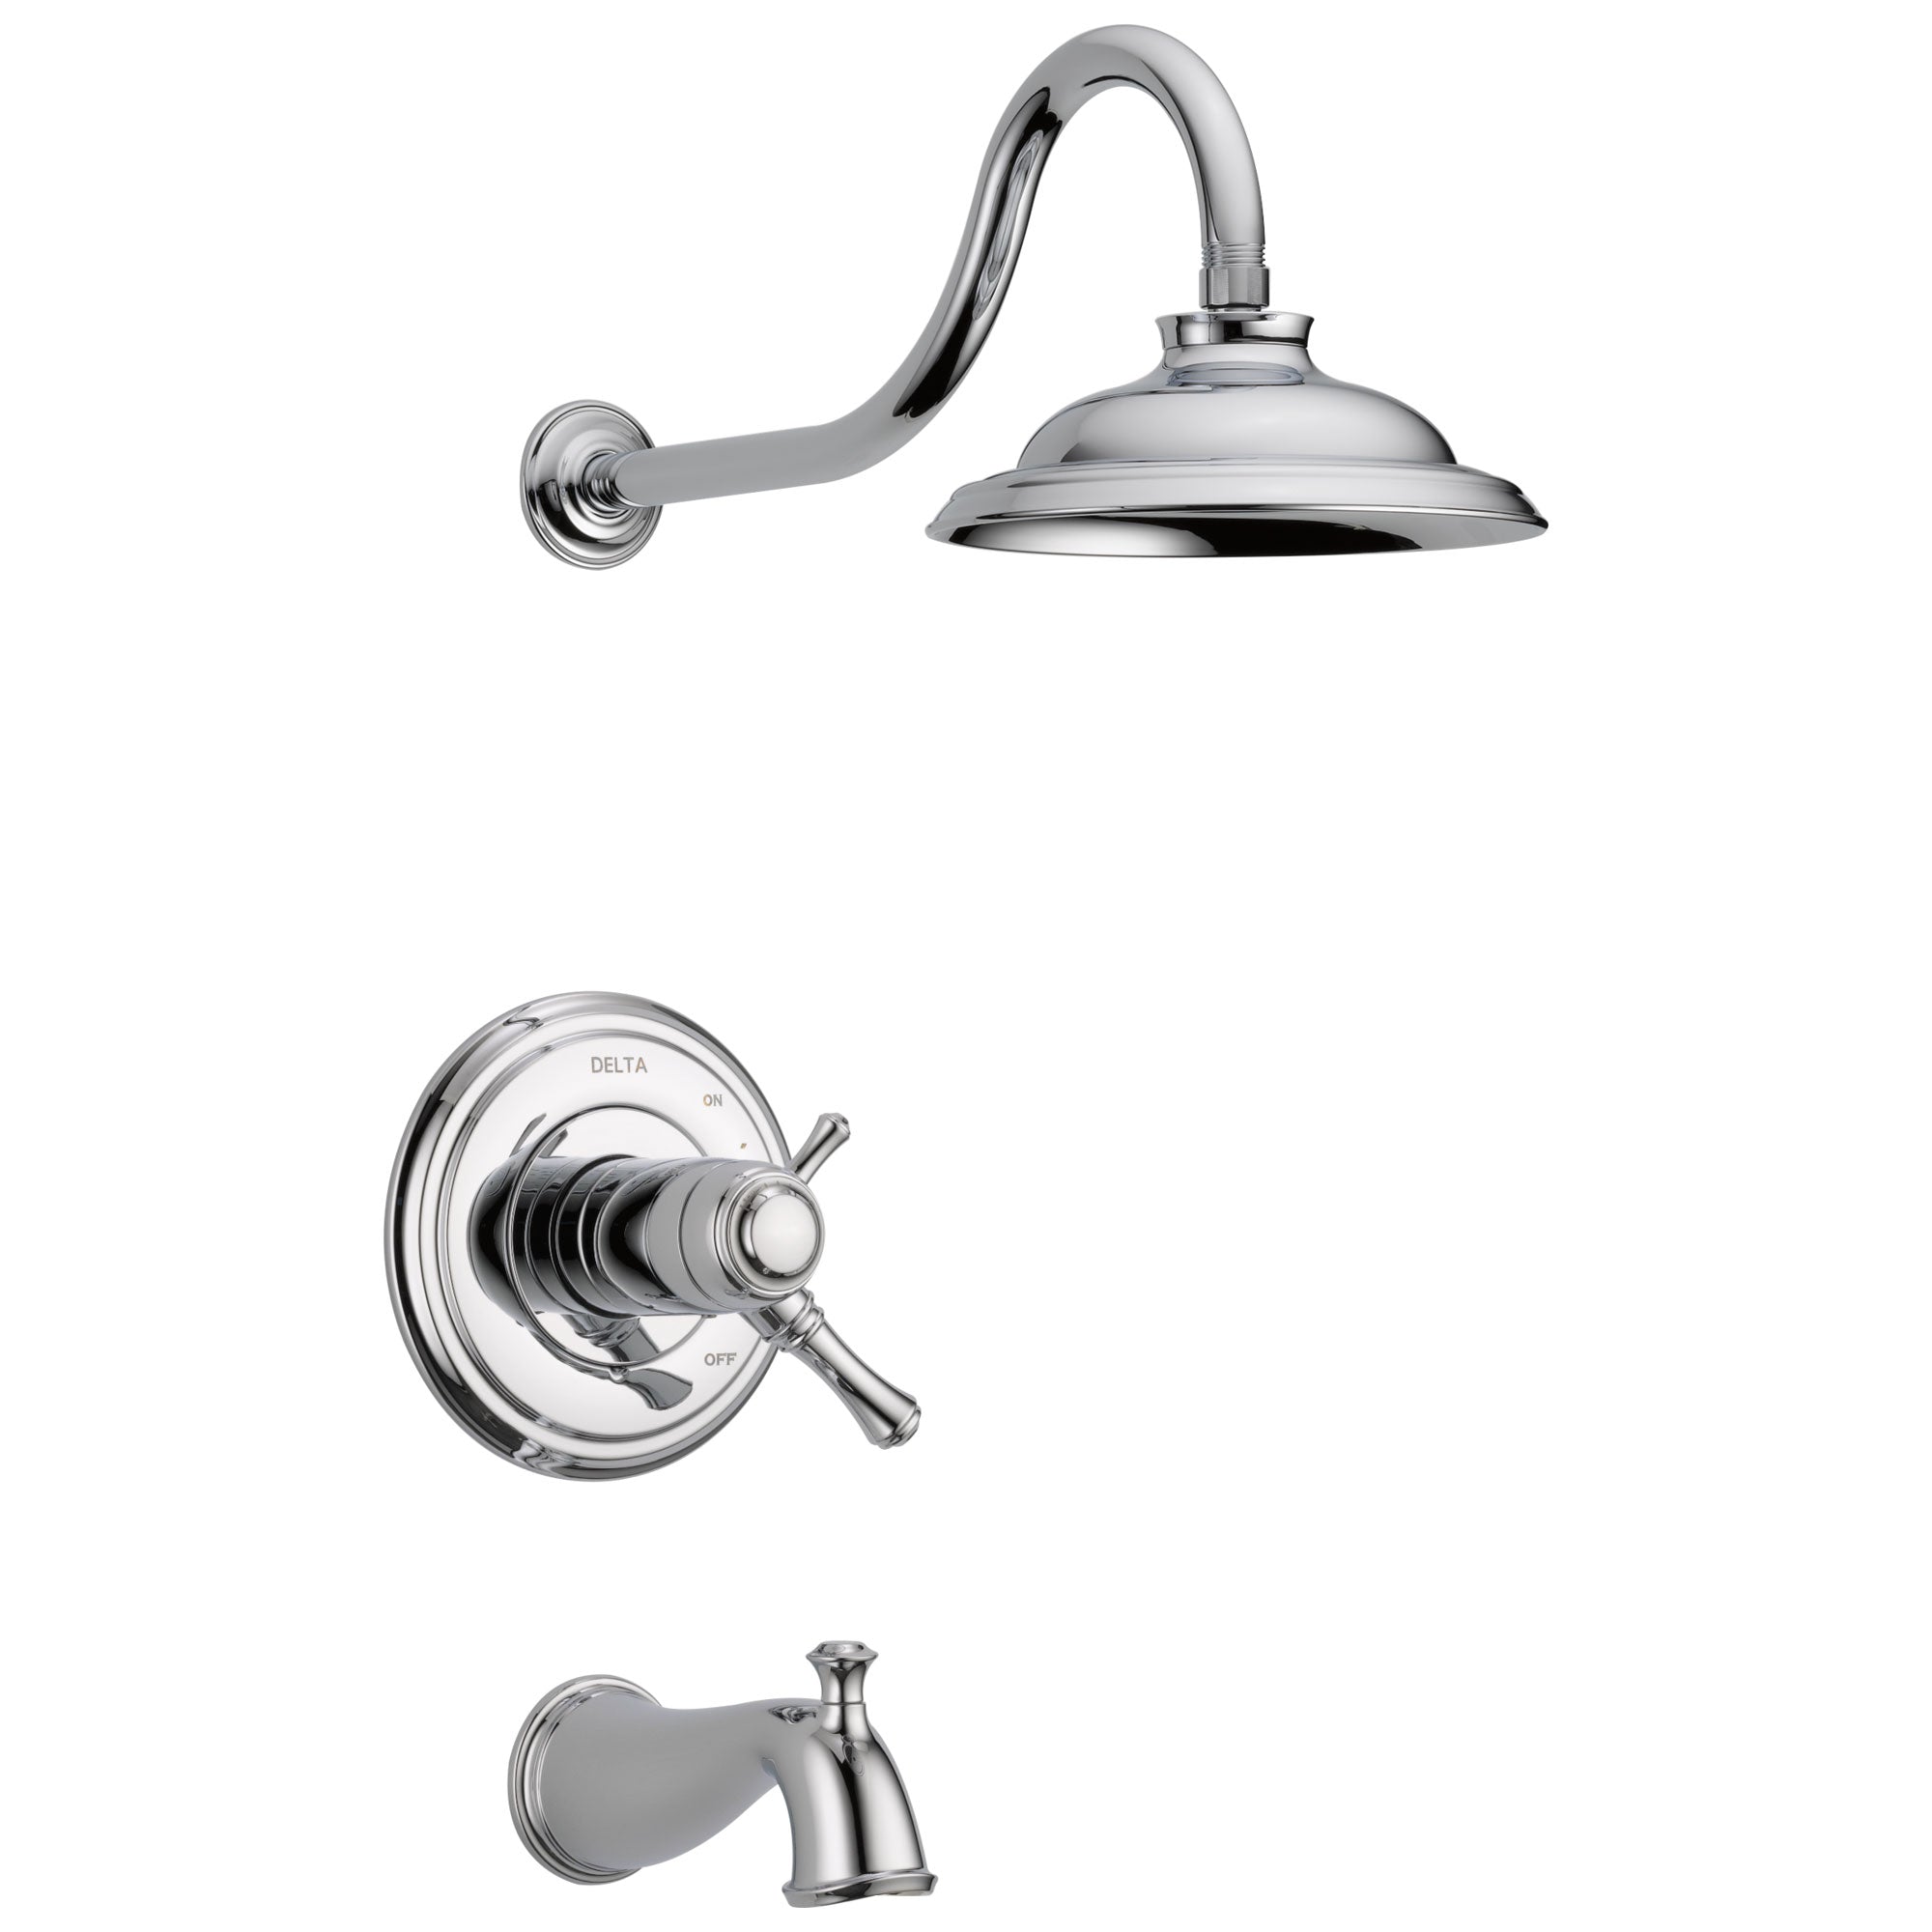 Delta Cassidy Chrome Finish TempAssure Water Efficient H2OKinetic Tub & Shower Combo Includes Handles, 17T Cartridge, and Valve with Stops D3218V